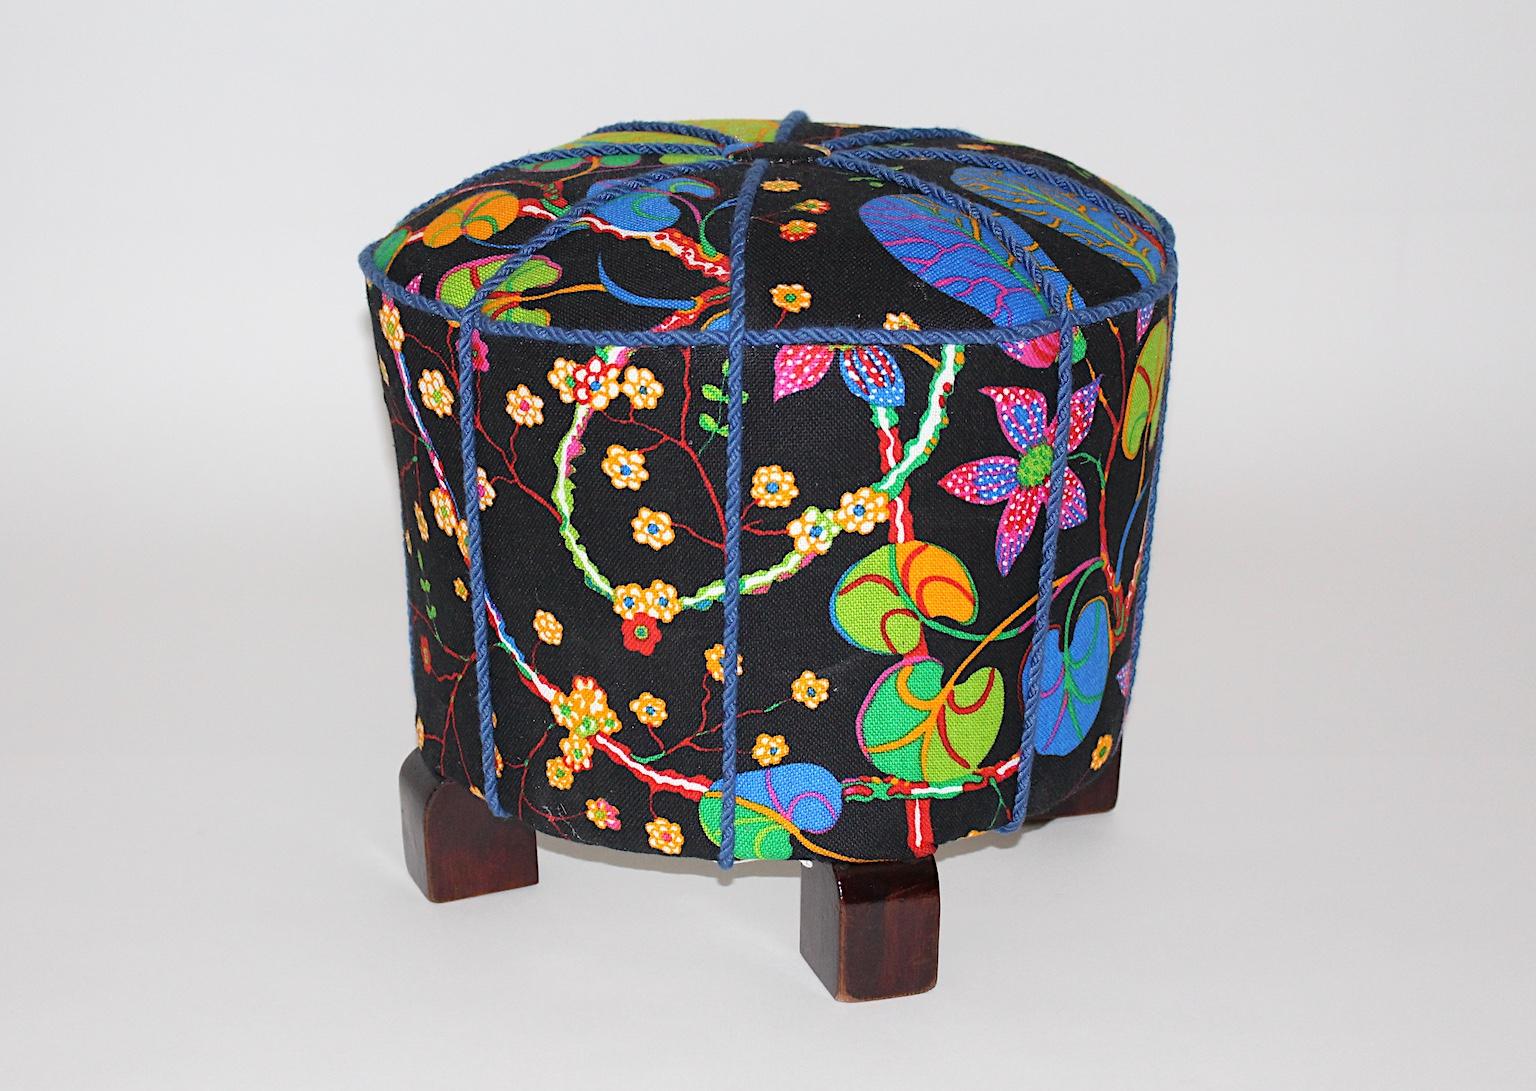 Art Deco Vintage Beech Pouf or Stool with Josef Frank Fabric, 1930s, Austria For Sale 6